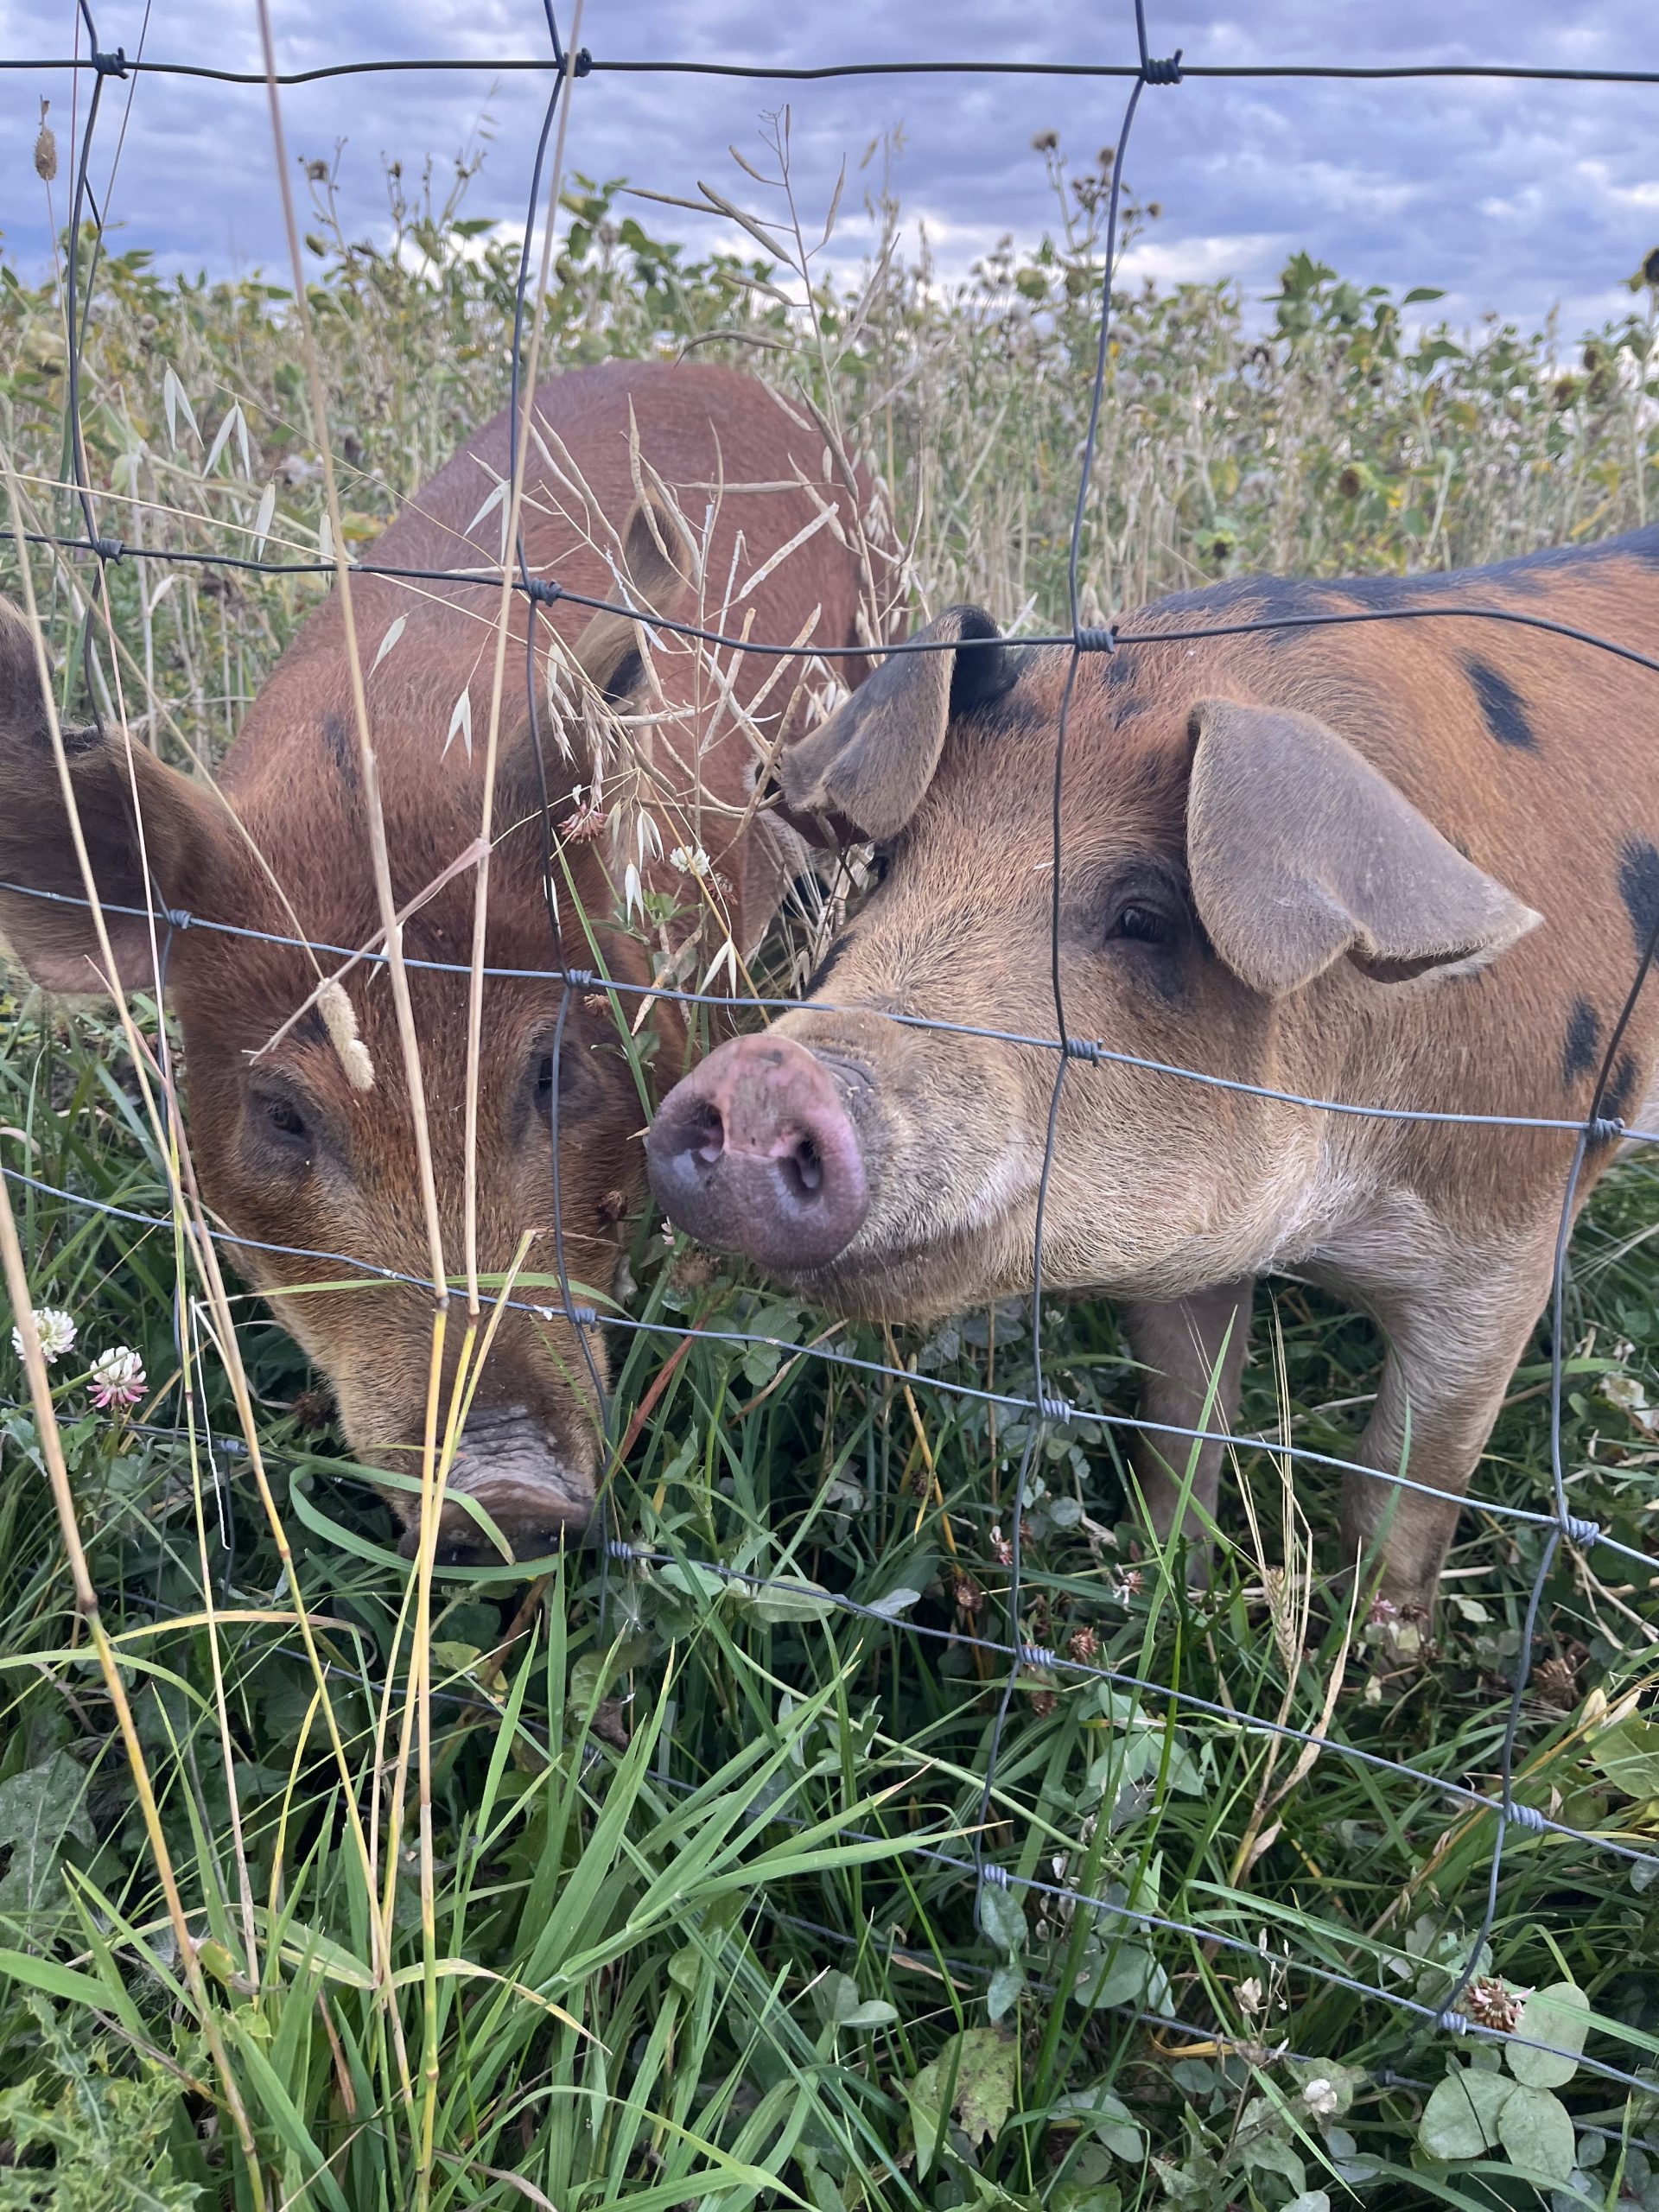 Two russet-coloured hogs in tall grass behind a fence